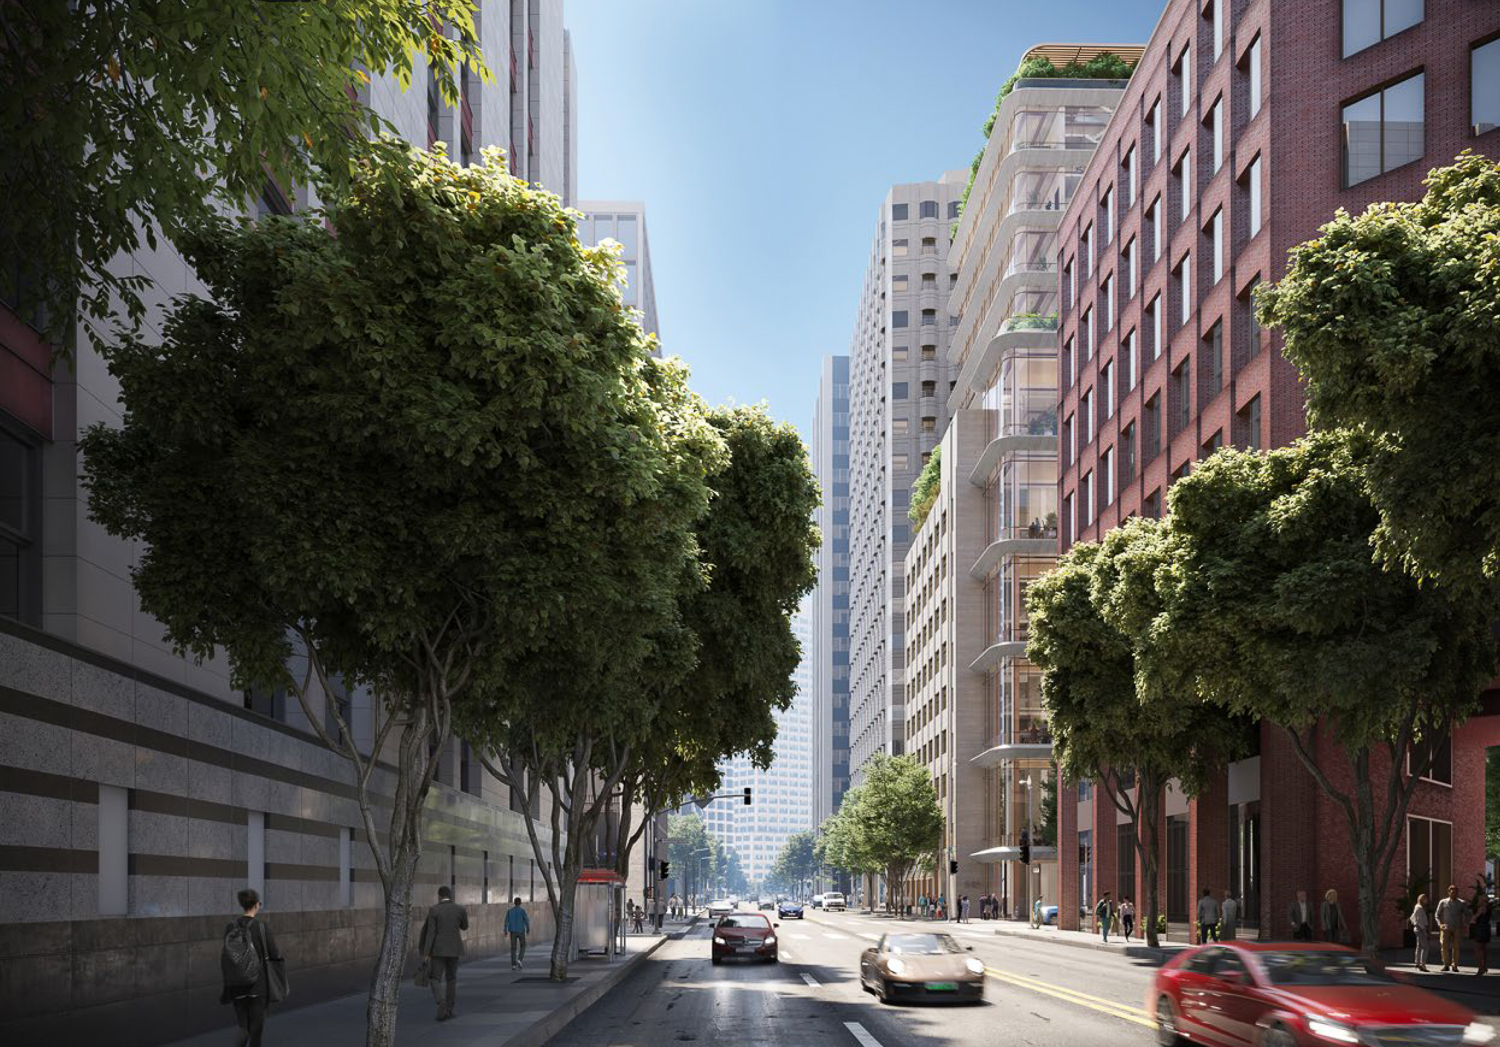 3 Transamerica seen looking along Sansome Street, rendering by Foster + Partners